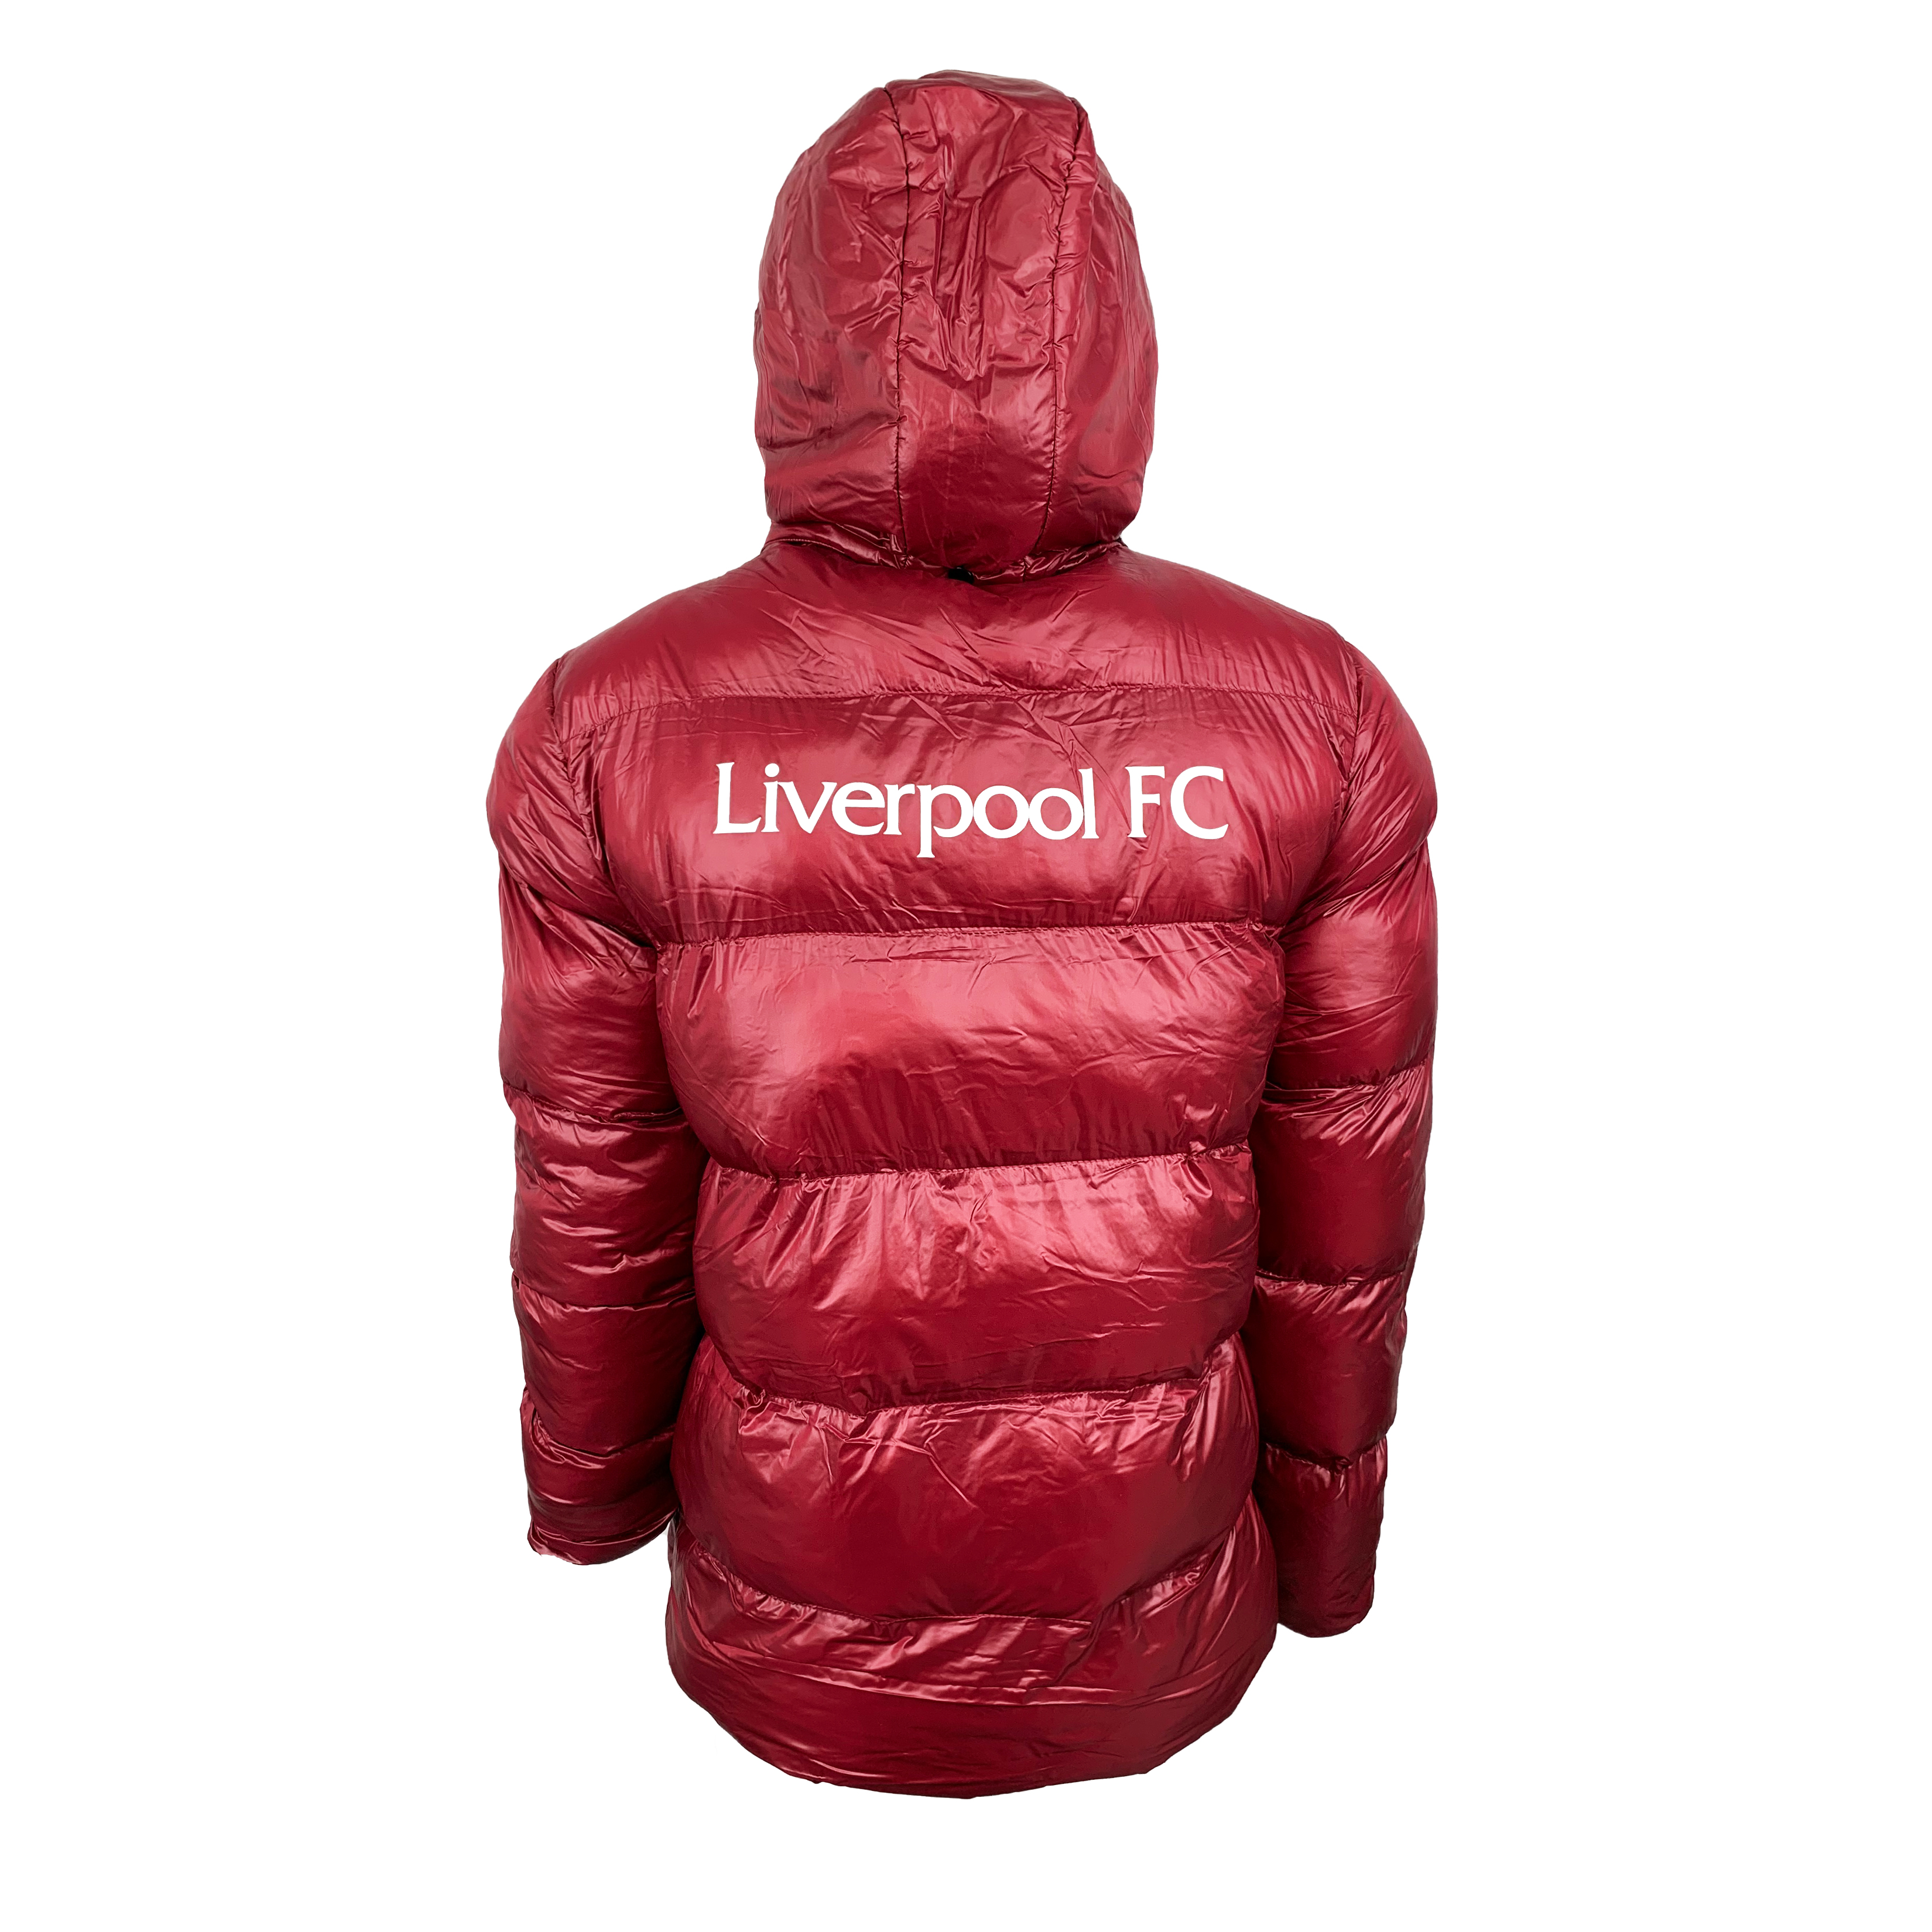 Liverpool Winter Jacket, With Removable Hood, Licensed Liverpool Puffer Jacket (YM) - image 4 of 4